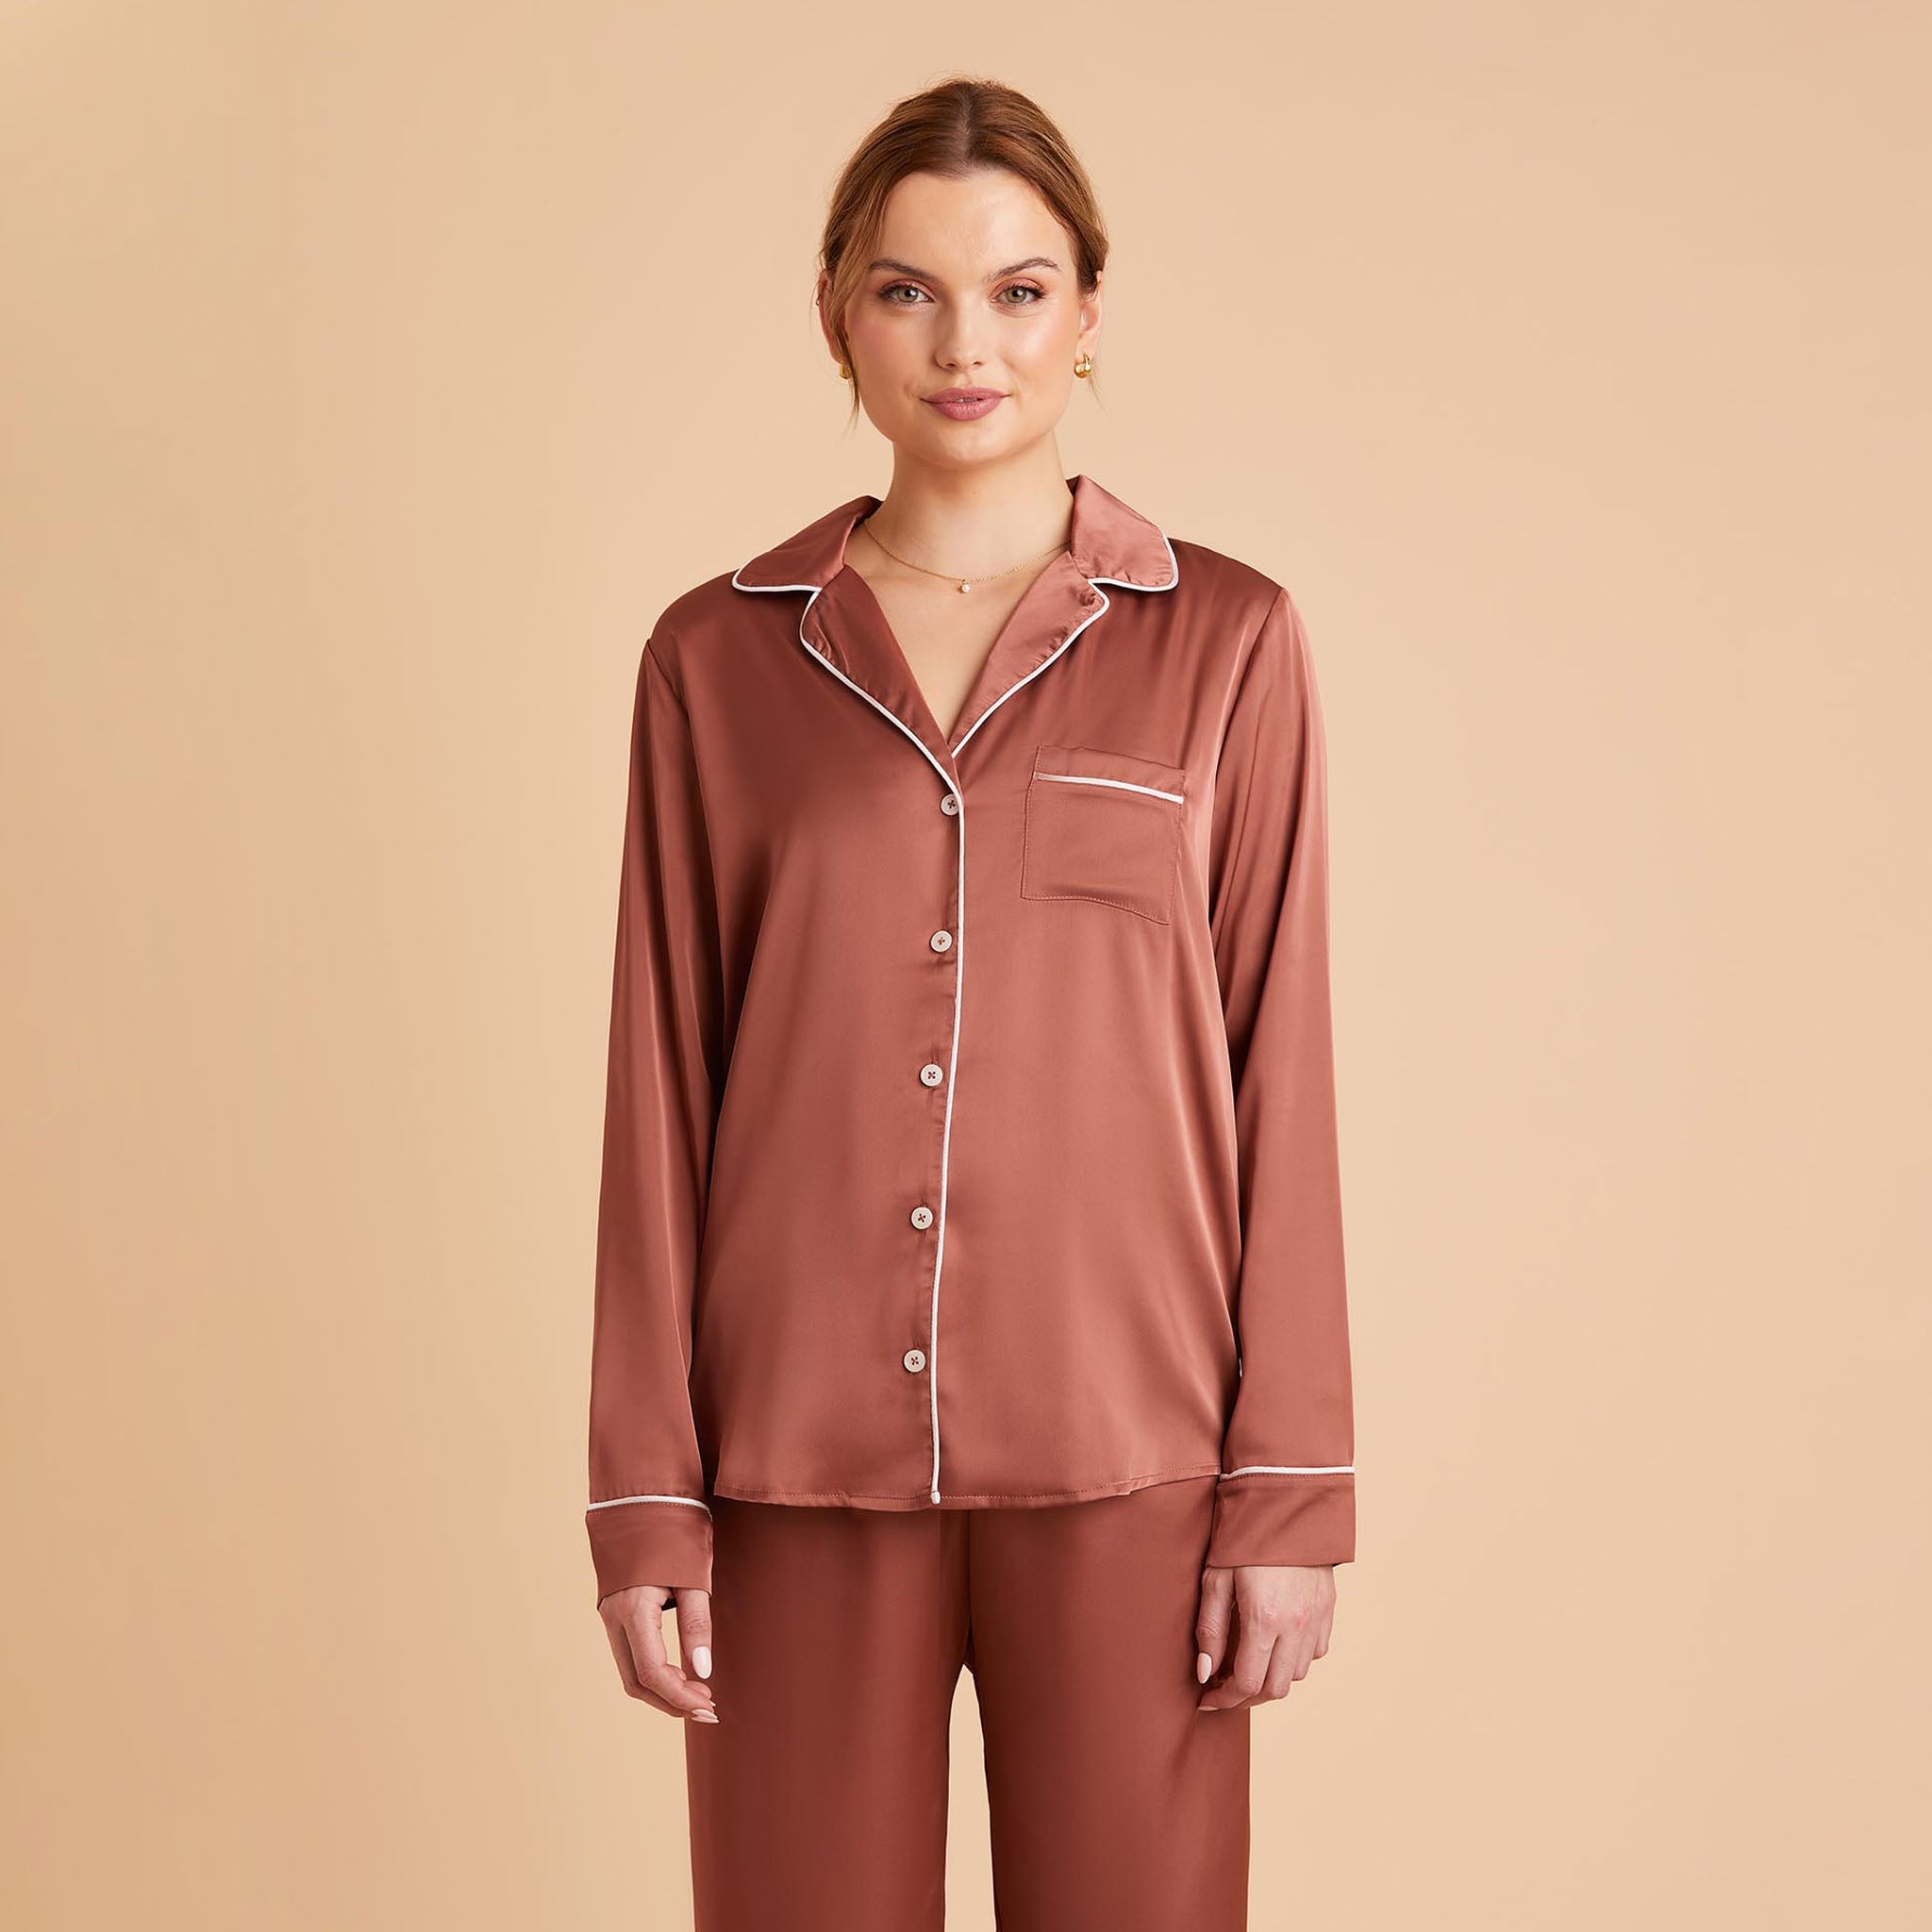 Jonny Satin Long Sleeve Pajama Top With White Piping in desert rose, front view